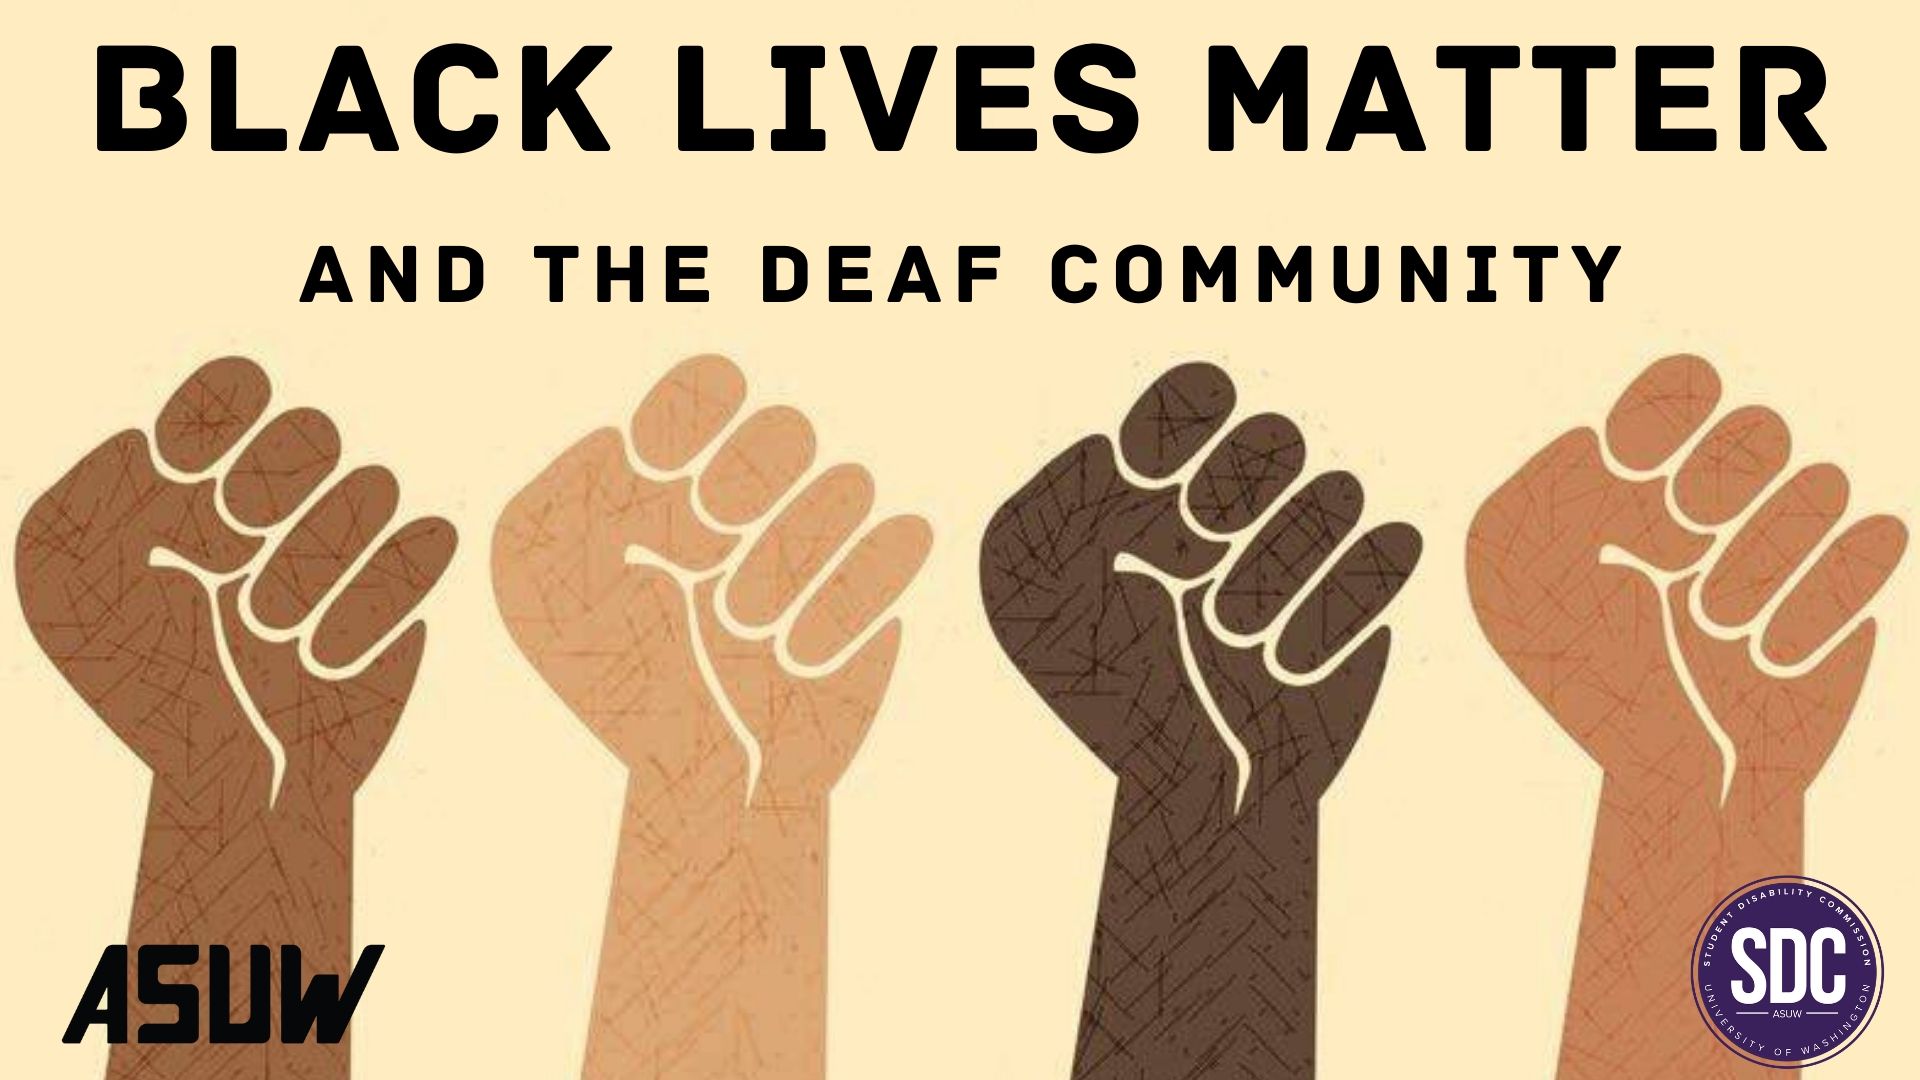 Tan background with varied skin color (white, brown, black) hands raised in fists. Black text that reads "BLACK LIVES MATTER AND THE DEAF COMMUNITY". Black ASUW logo in bottom left corner, purple SDC logo in bottom right corner.